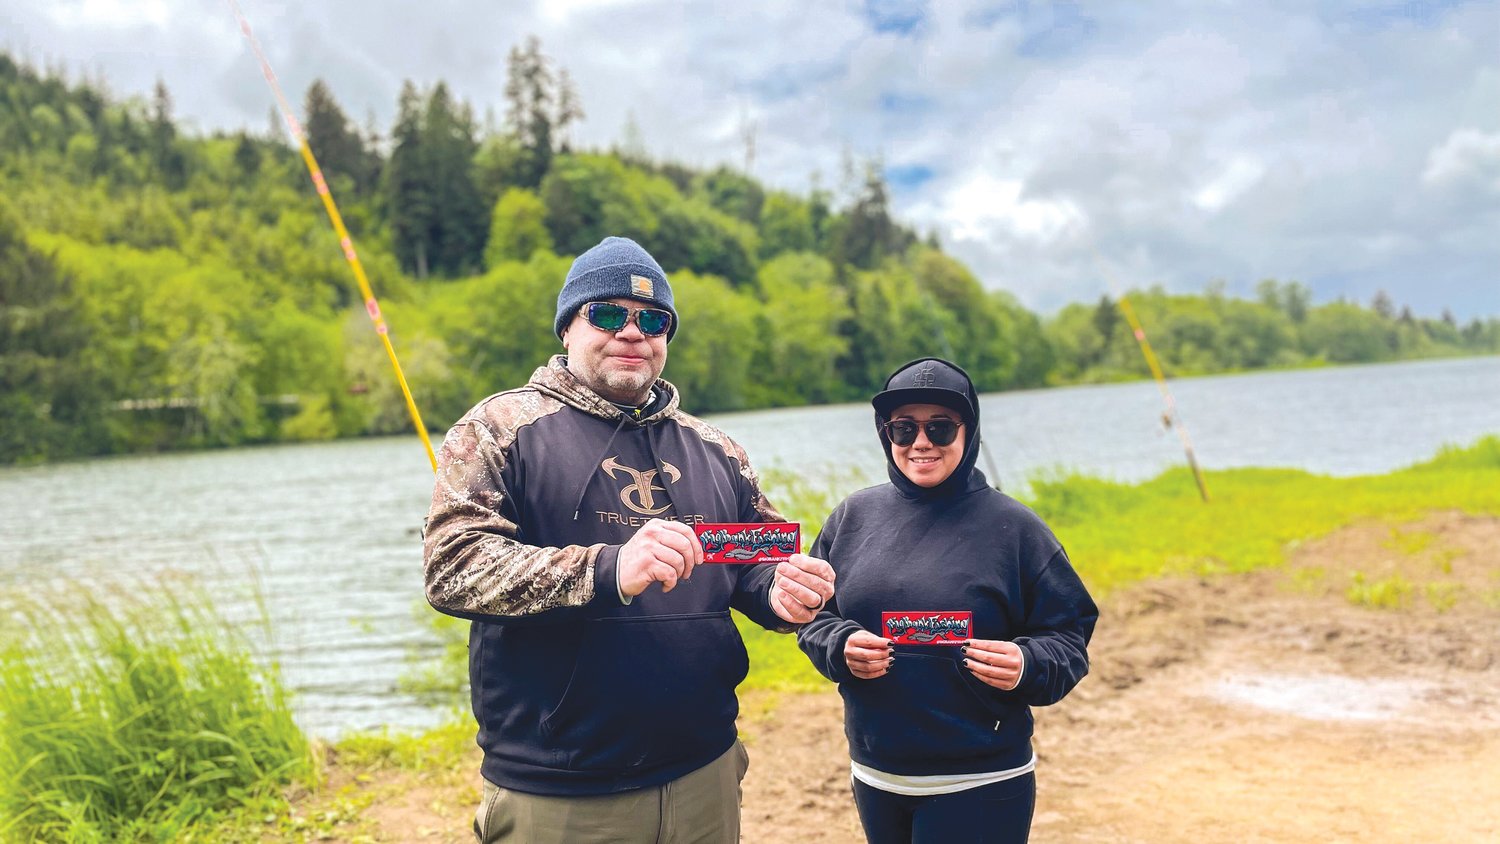 Rich and Julia Eaton pose for a photo at Friends Landing in Montesano next to their custom Meat Hunter poles.